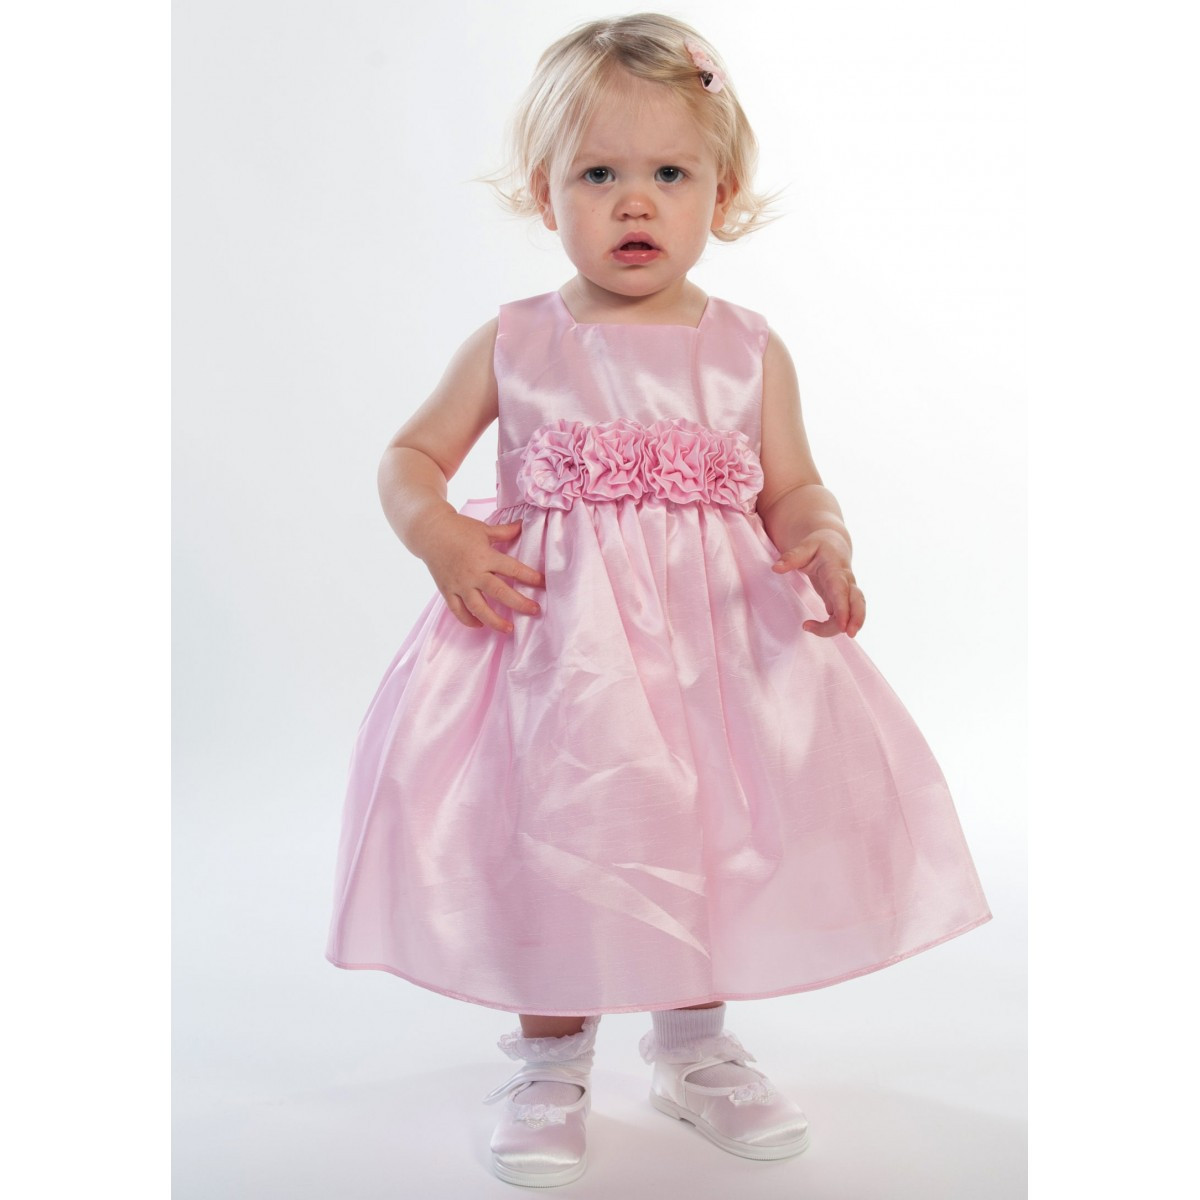 Party Dresses Baby
 Pink taffeta rose waist baby party dress 3 24 months